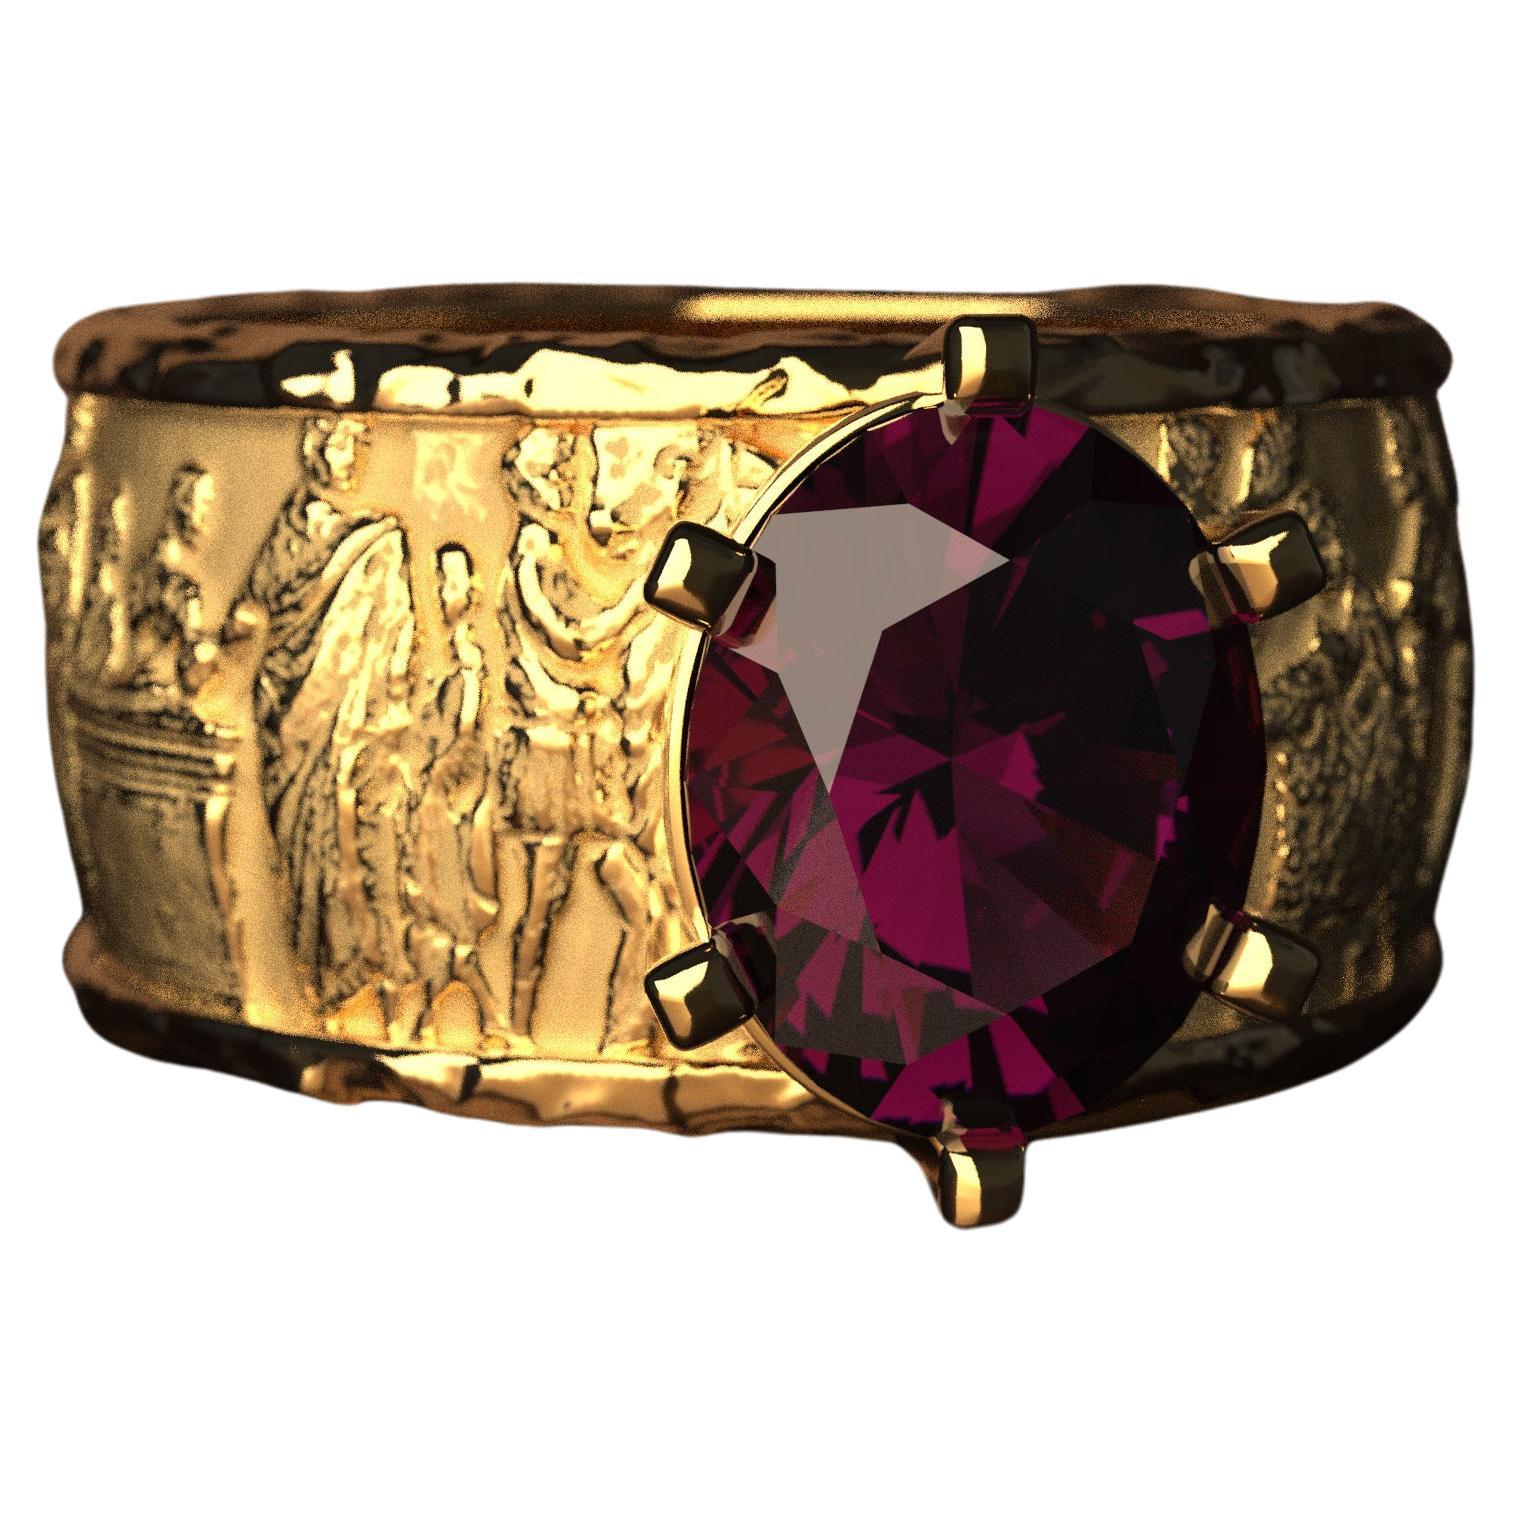 For Sale:  Natural Purple Garnet Ring in 14k Gold Made in Italy, for Men or for Women